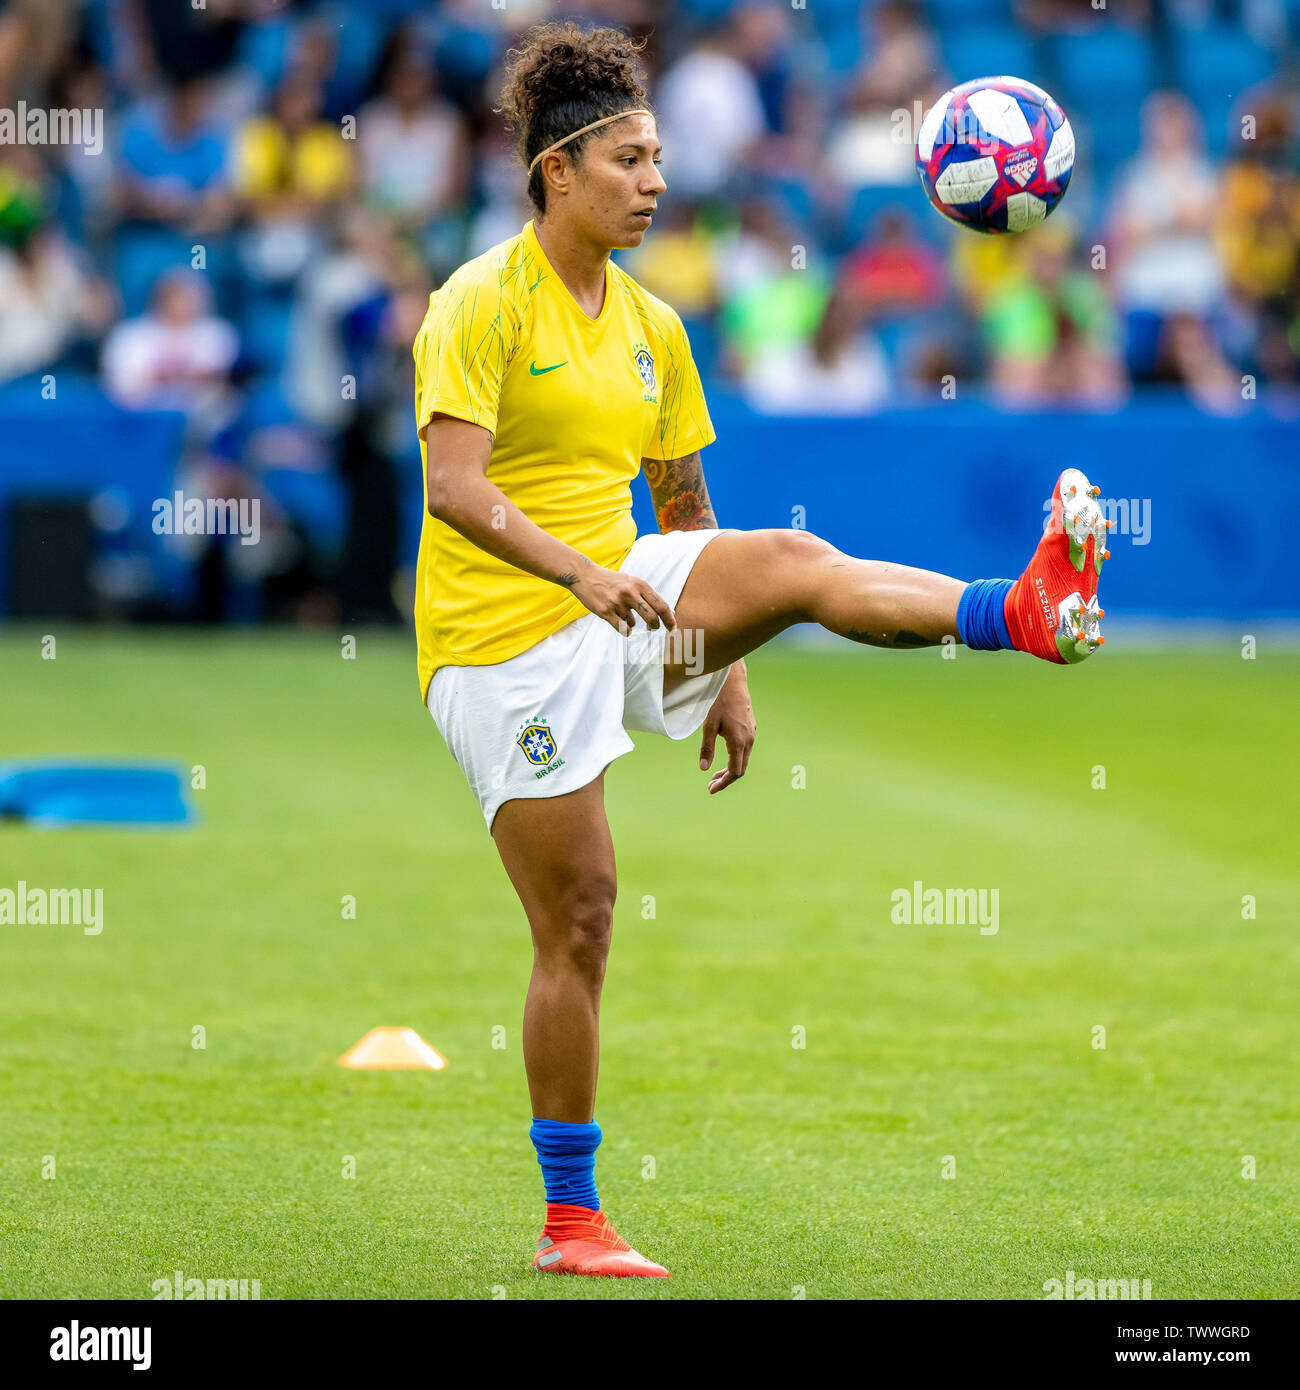 Le Havre, France. 23rd June, 2019.  Cristiane from Brazil before a match between Brazil and France. World Cup Qualification Football. FIFA. Held at the Oceane Stadium in Le Havre, France. Credit: Foto Arena LTDA/Alamy Live News Stock Photo